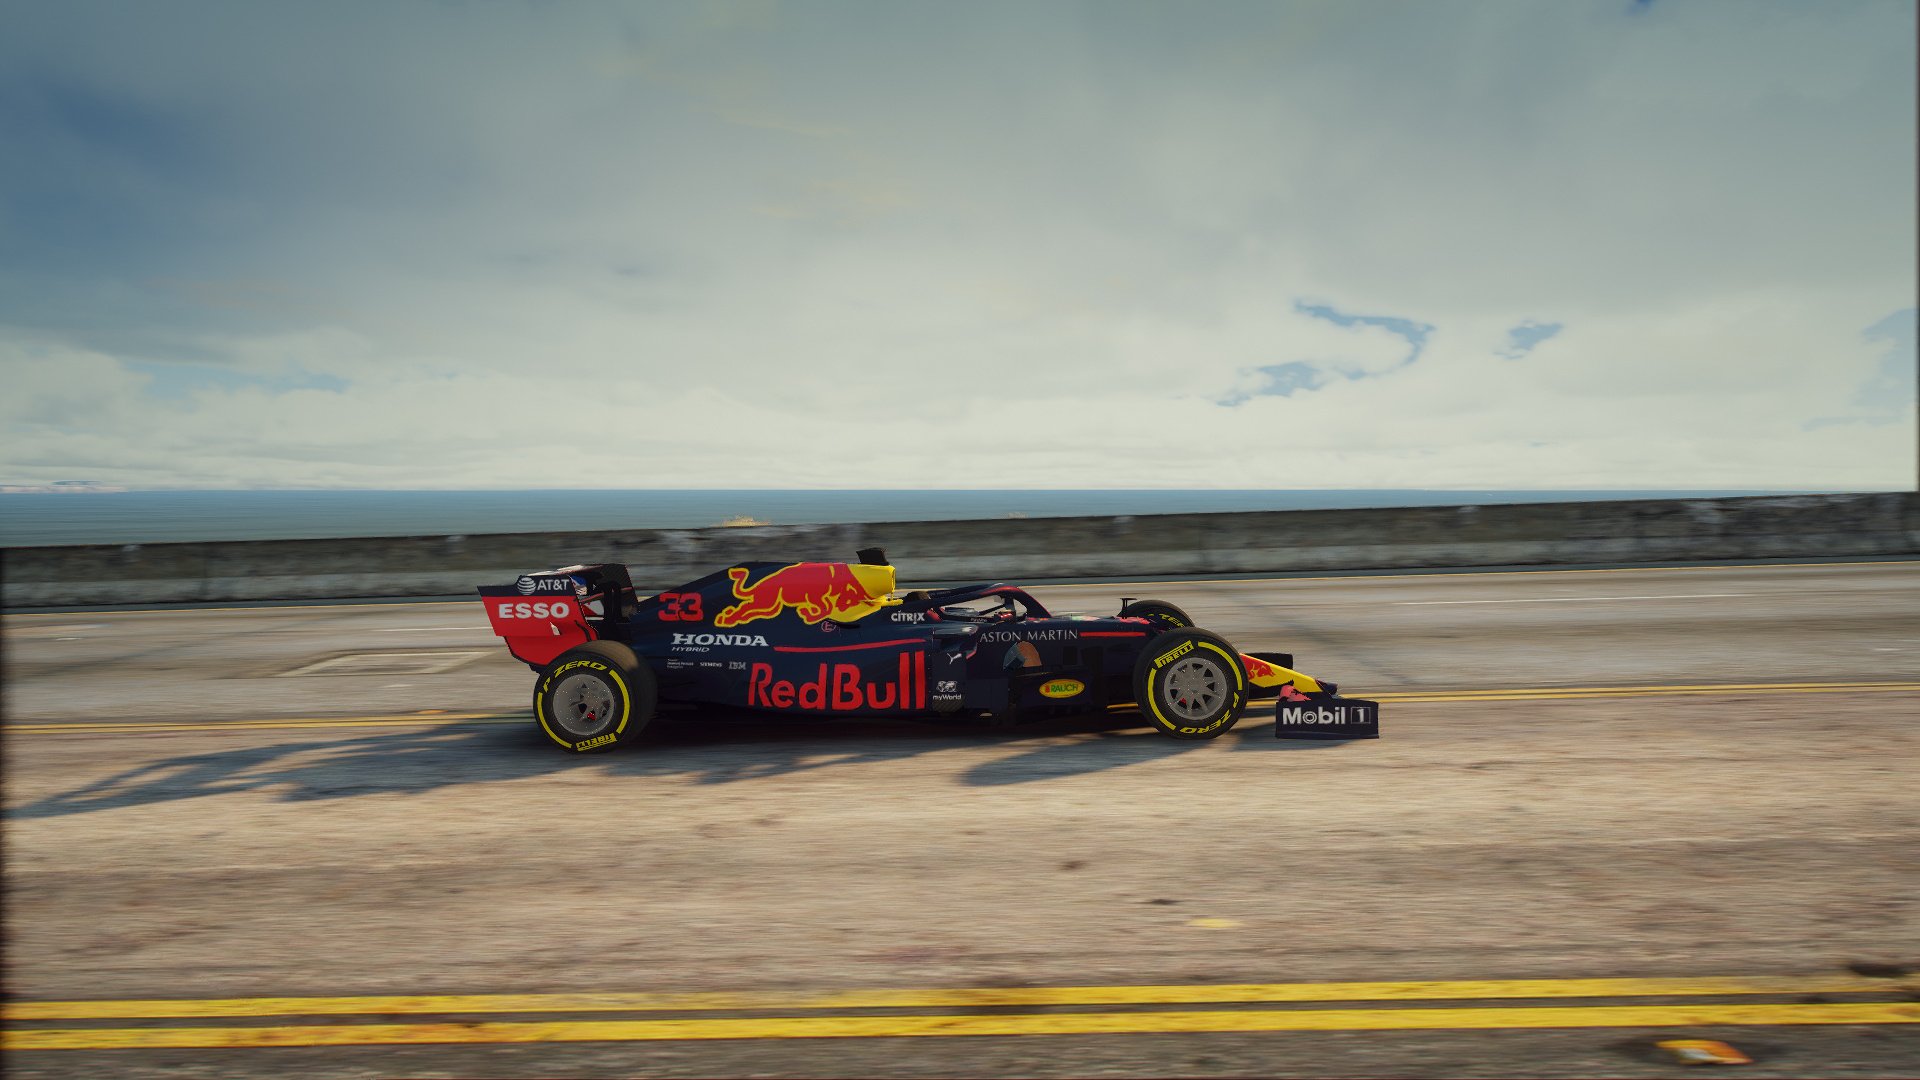 TECH TUESDAY How Red Bull and Honda cleverly transformed 2020s RB16 into  the titlewinning RB16B  Formula 1